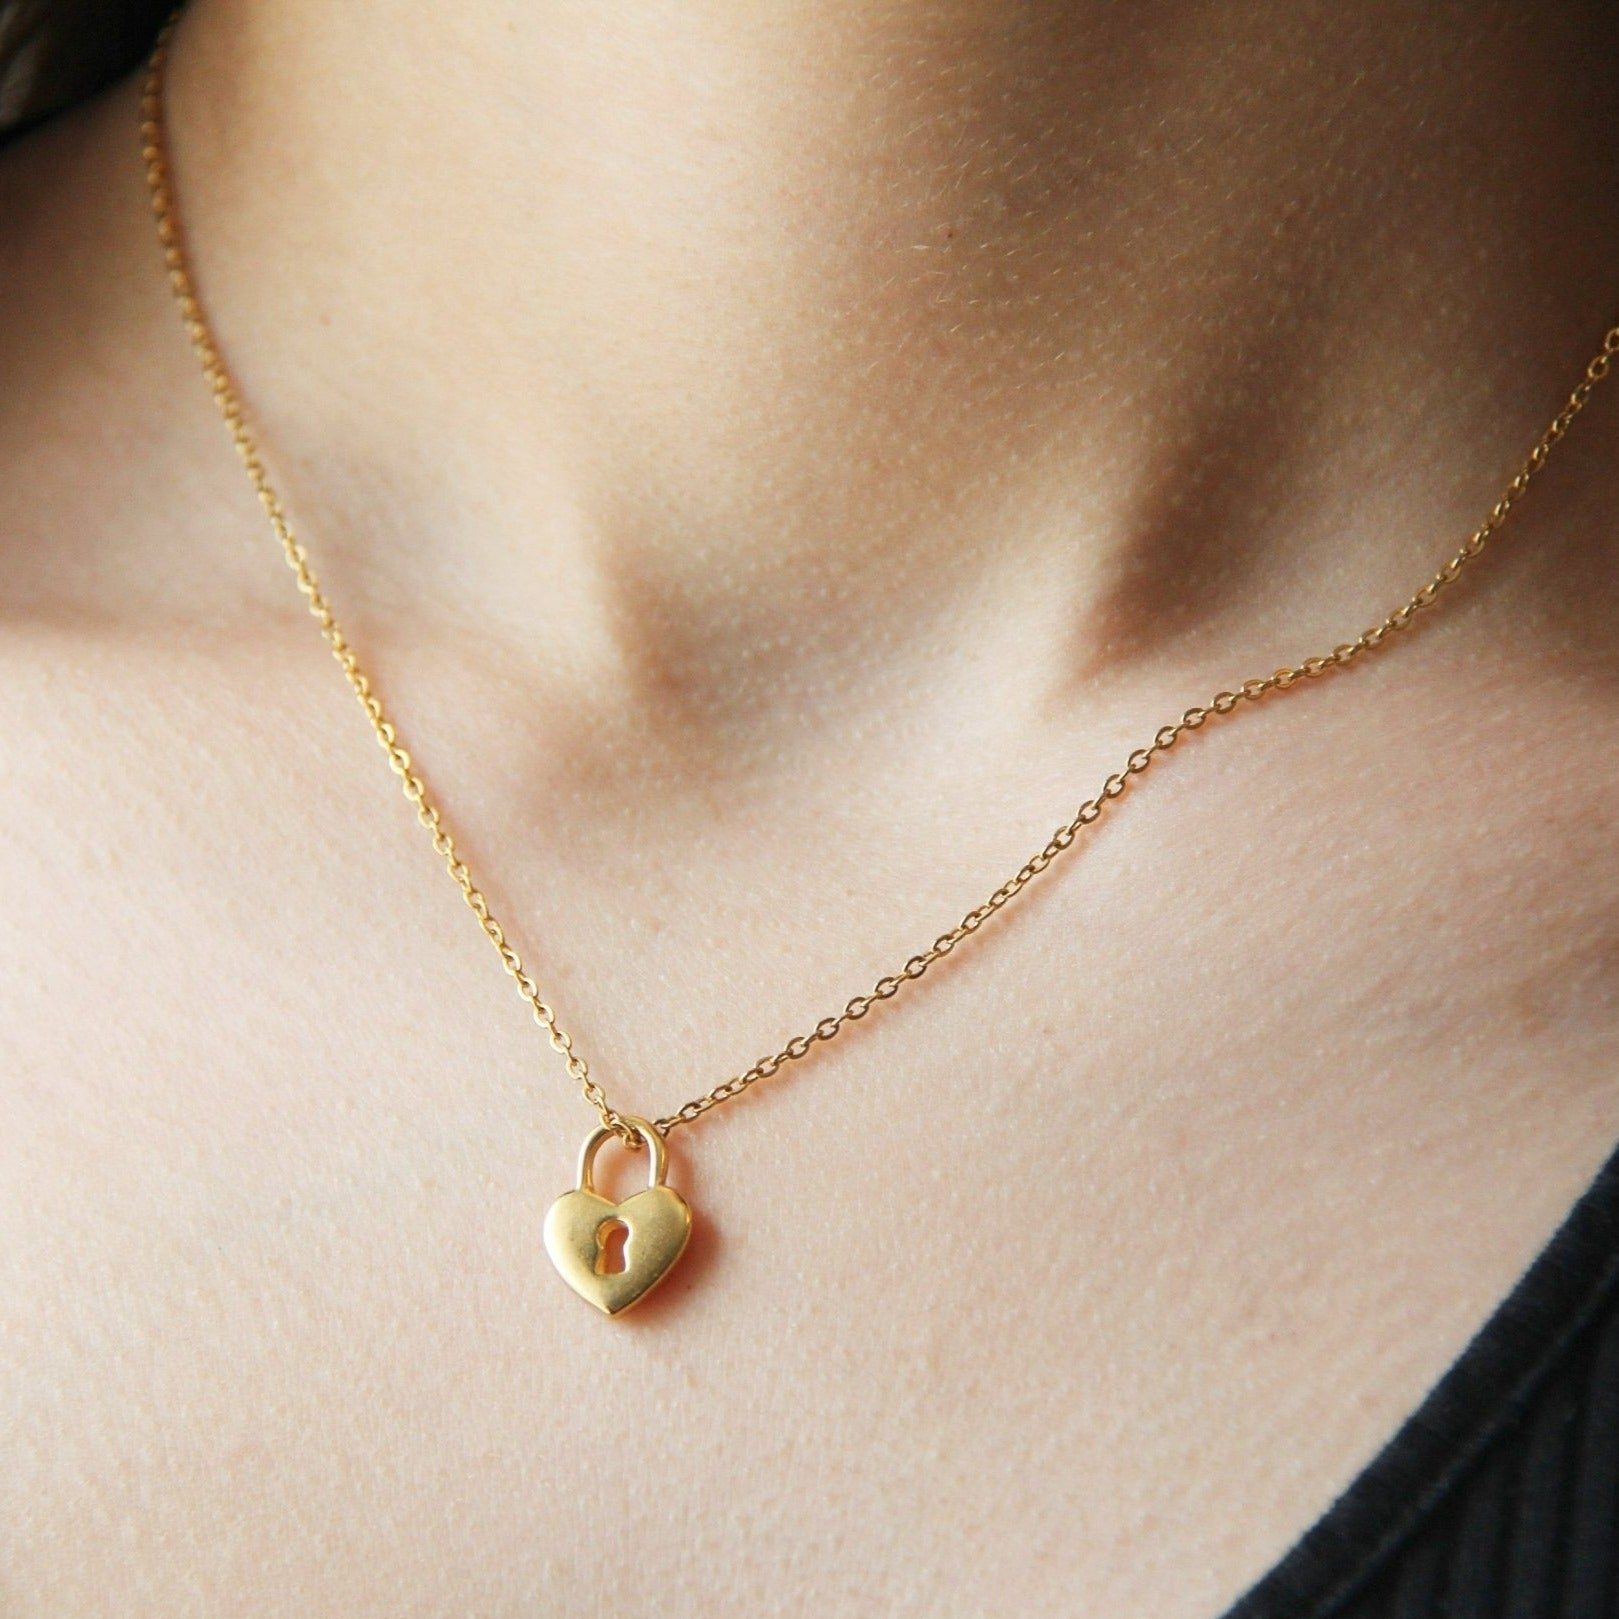 Buy Gold Open Locket Oval Photo Necklace, Gold Circle Oval Necklace, a  Stainless Steel Gold Necklace, Gold Jewellery, Minimalist Dainty Jewelry  Online in India - Etsy